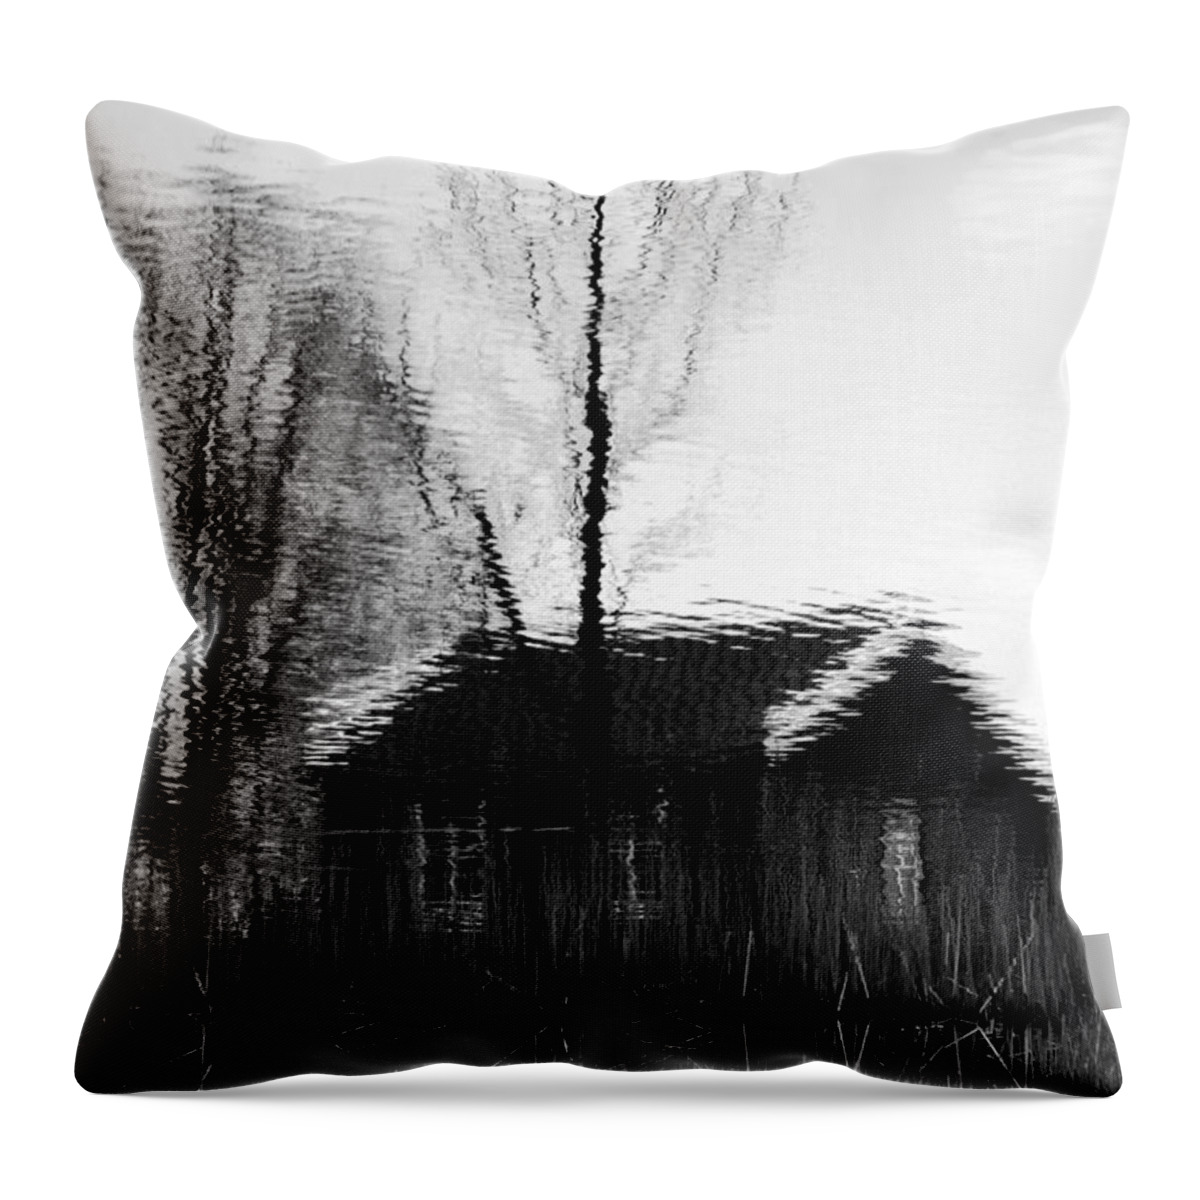 Black And White Throw Pillow featuring the photograph Water-ink house by Luc Van de Steeg